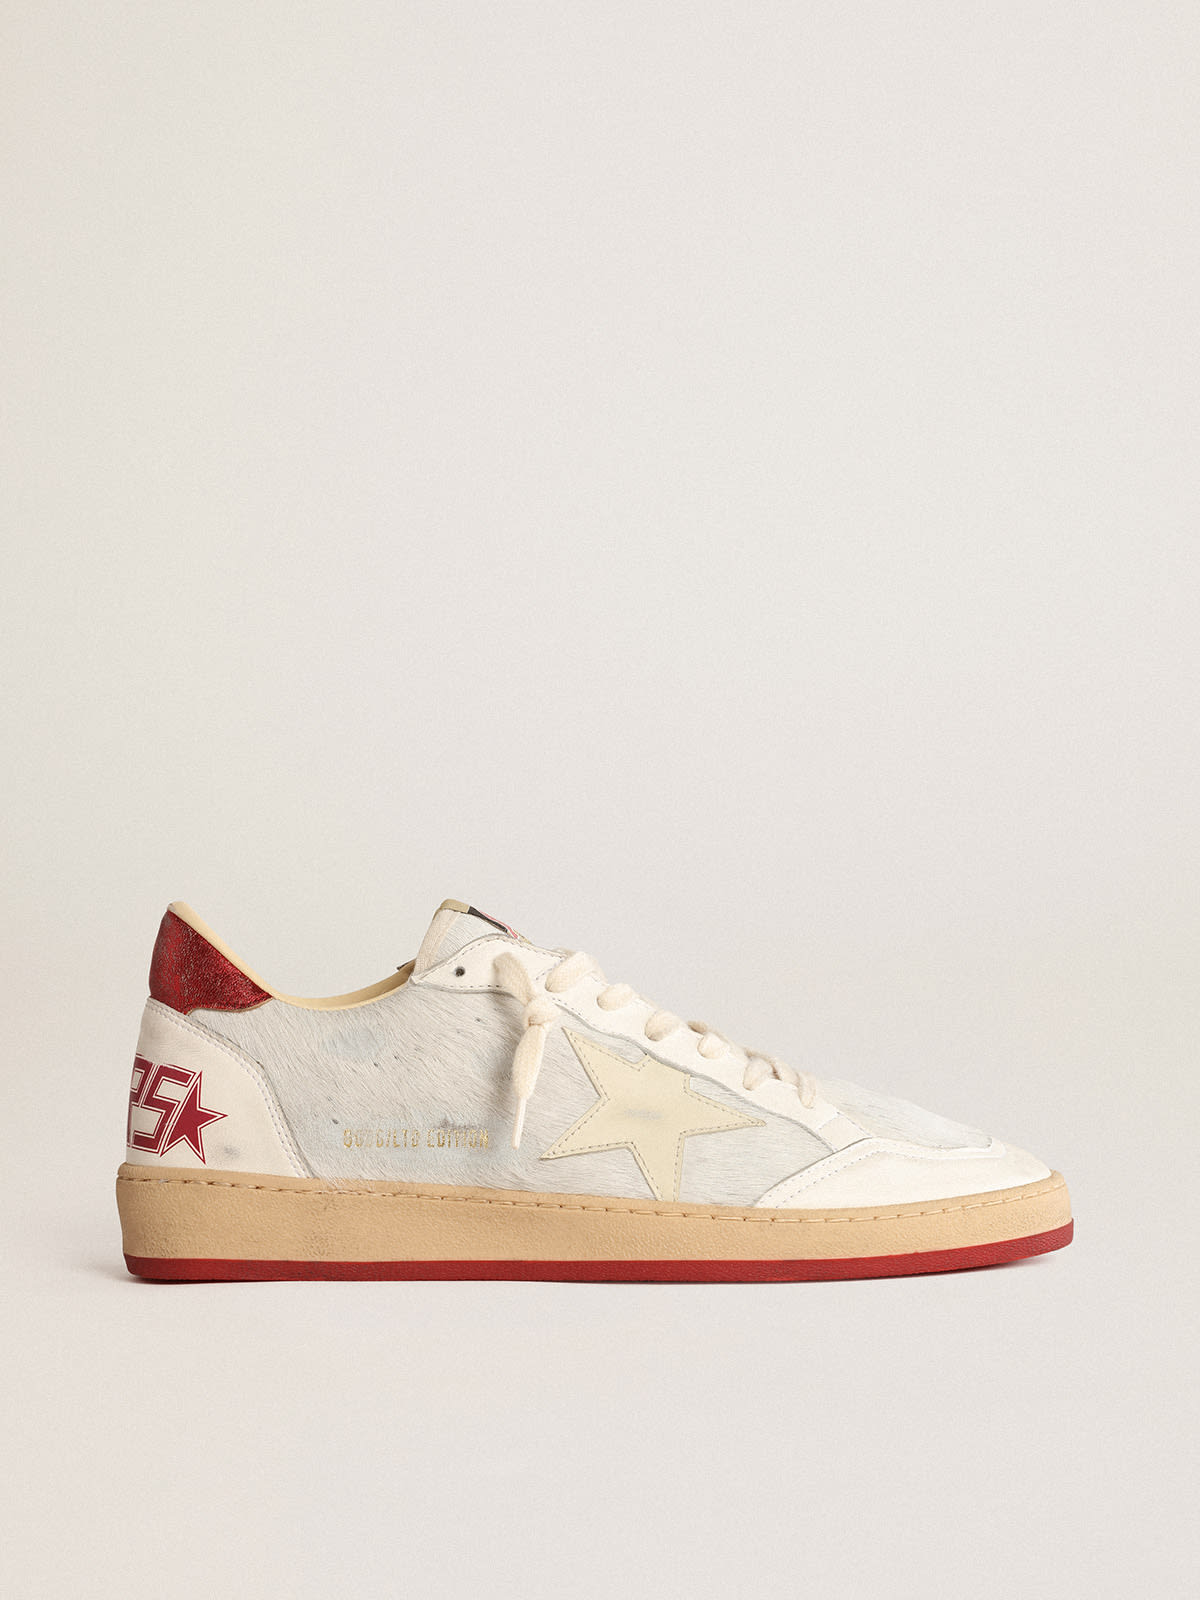 Golden Goose - Men’s Ball Star LTD CNY in white pony skin with leather star in 